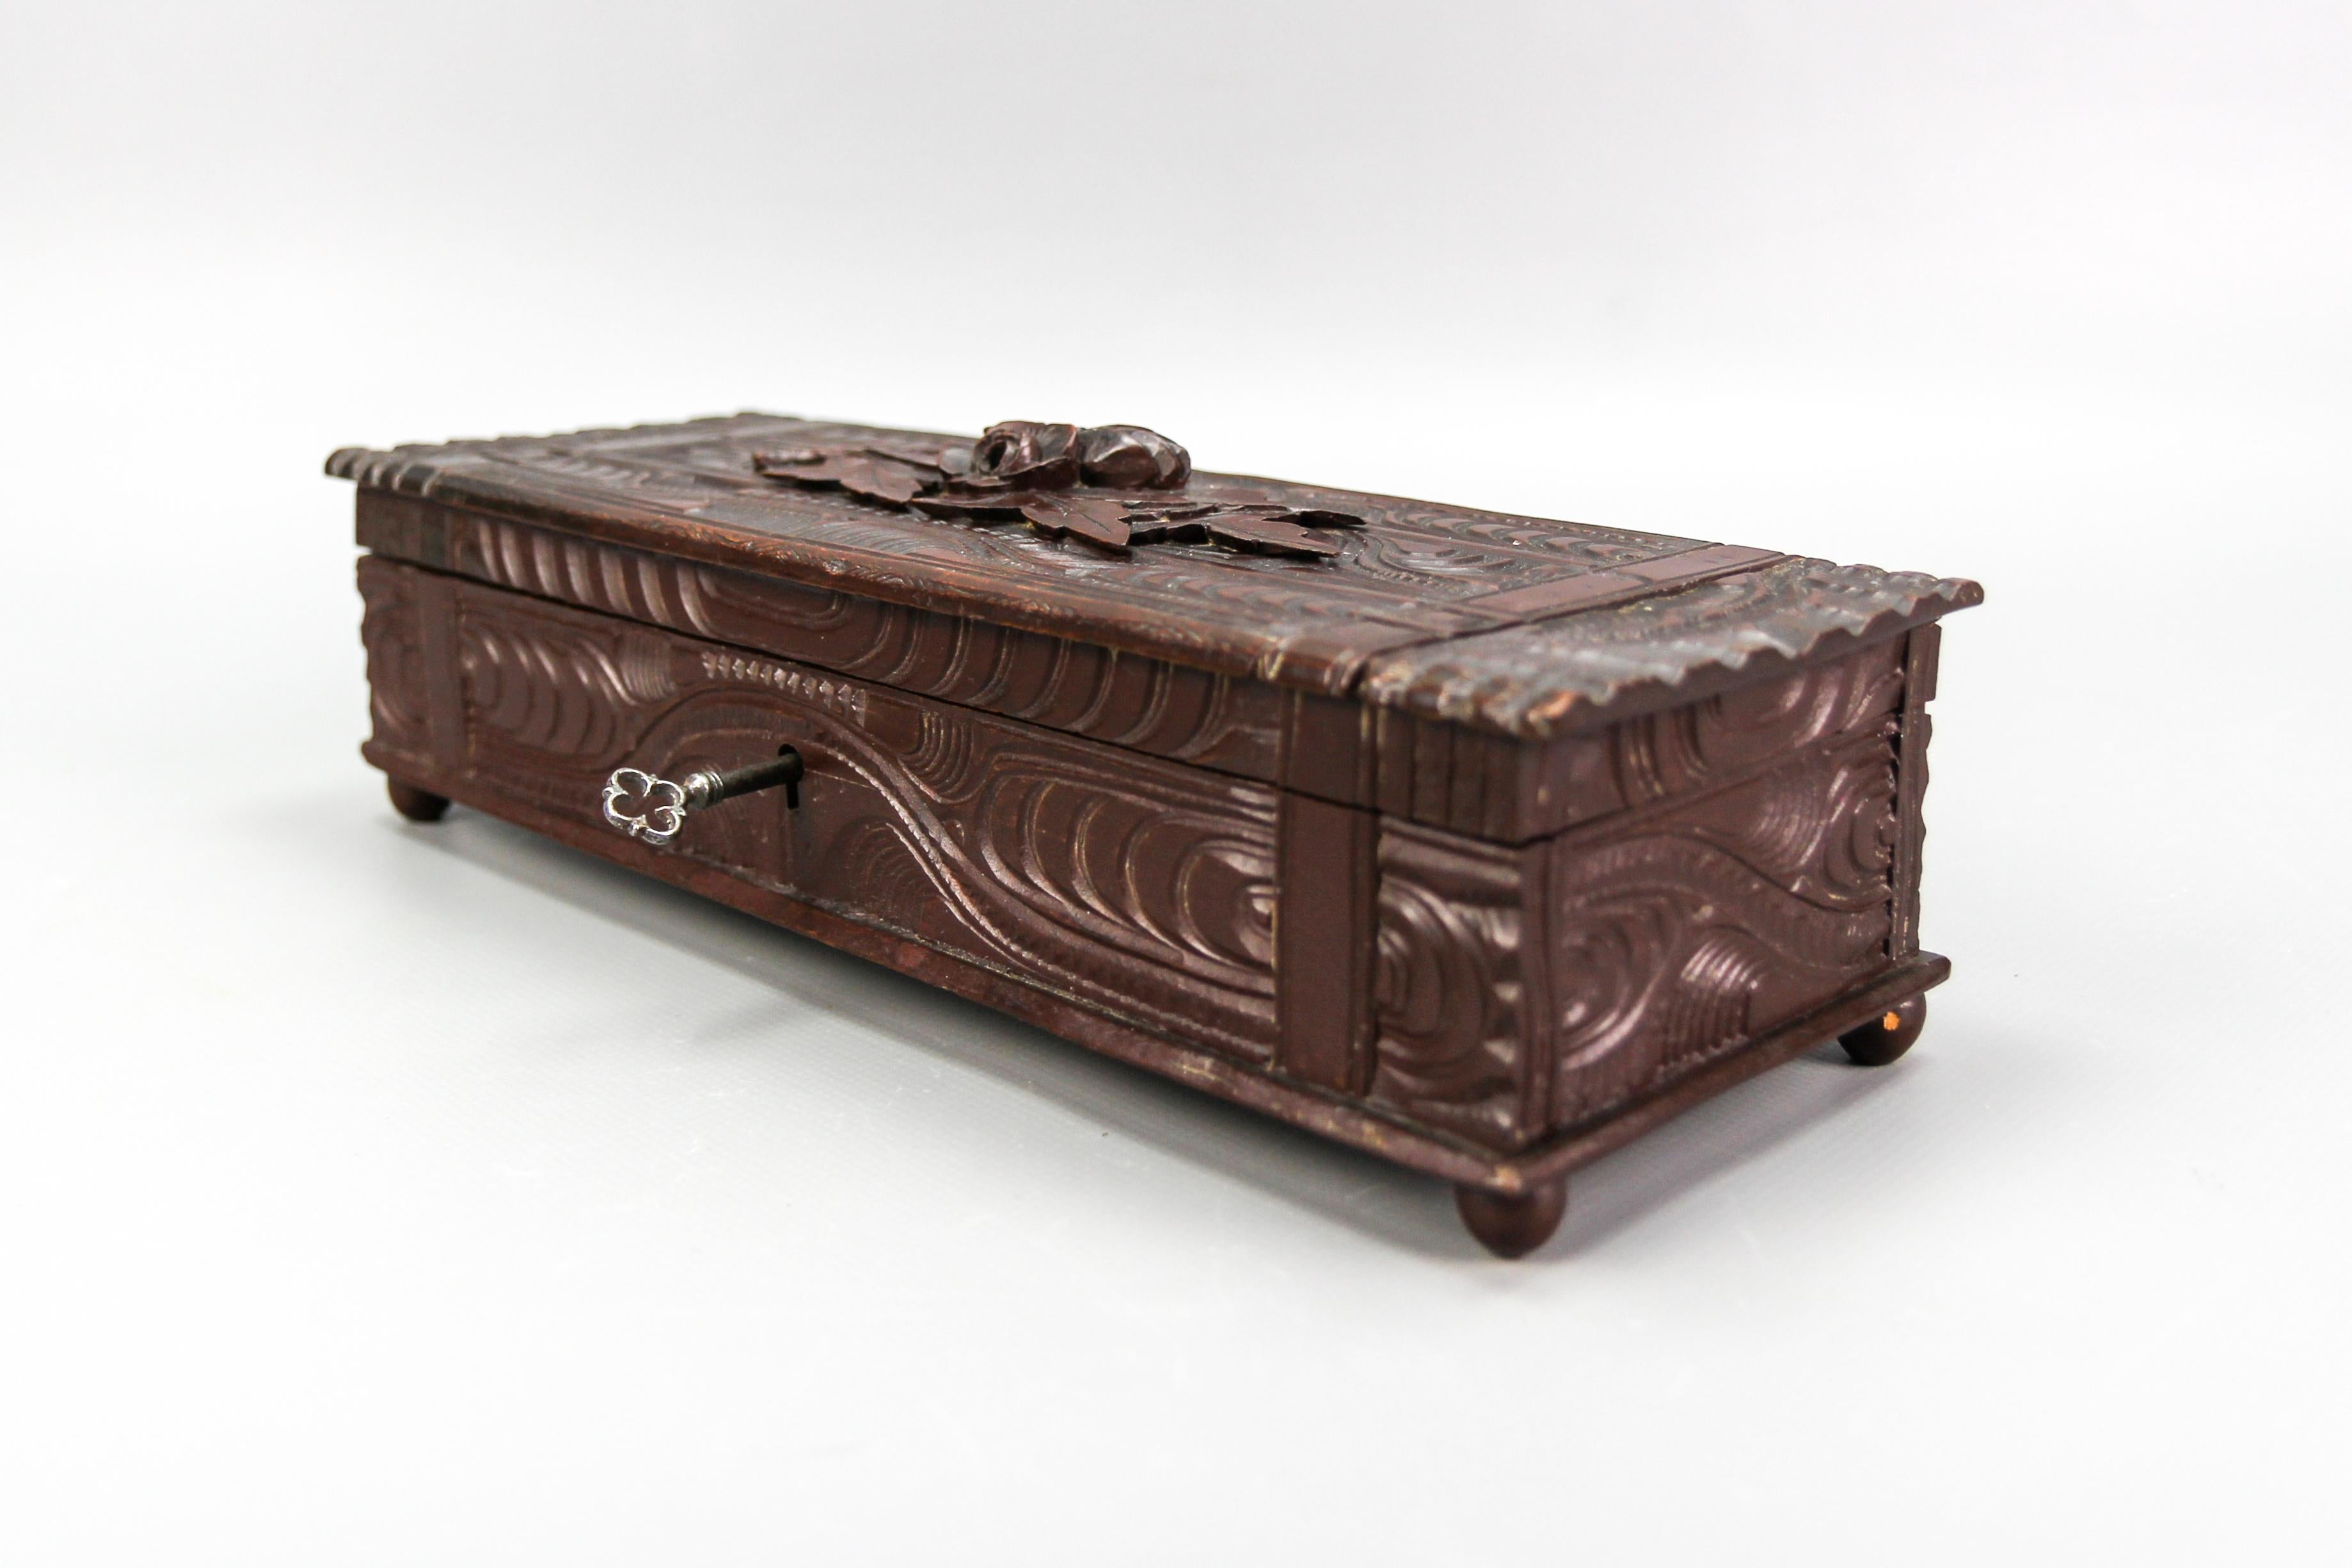 Antique Black Forest dark brown carved wood glove box, ca. 1900
This elegant and beautiful Black Forest style finely hand-carved linden wood glove box from ca. 1900 features a rectangular shape, carved with a wood grain pattern and with flowers and